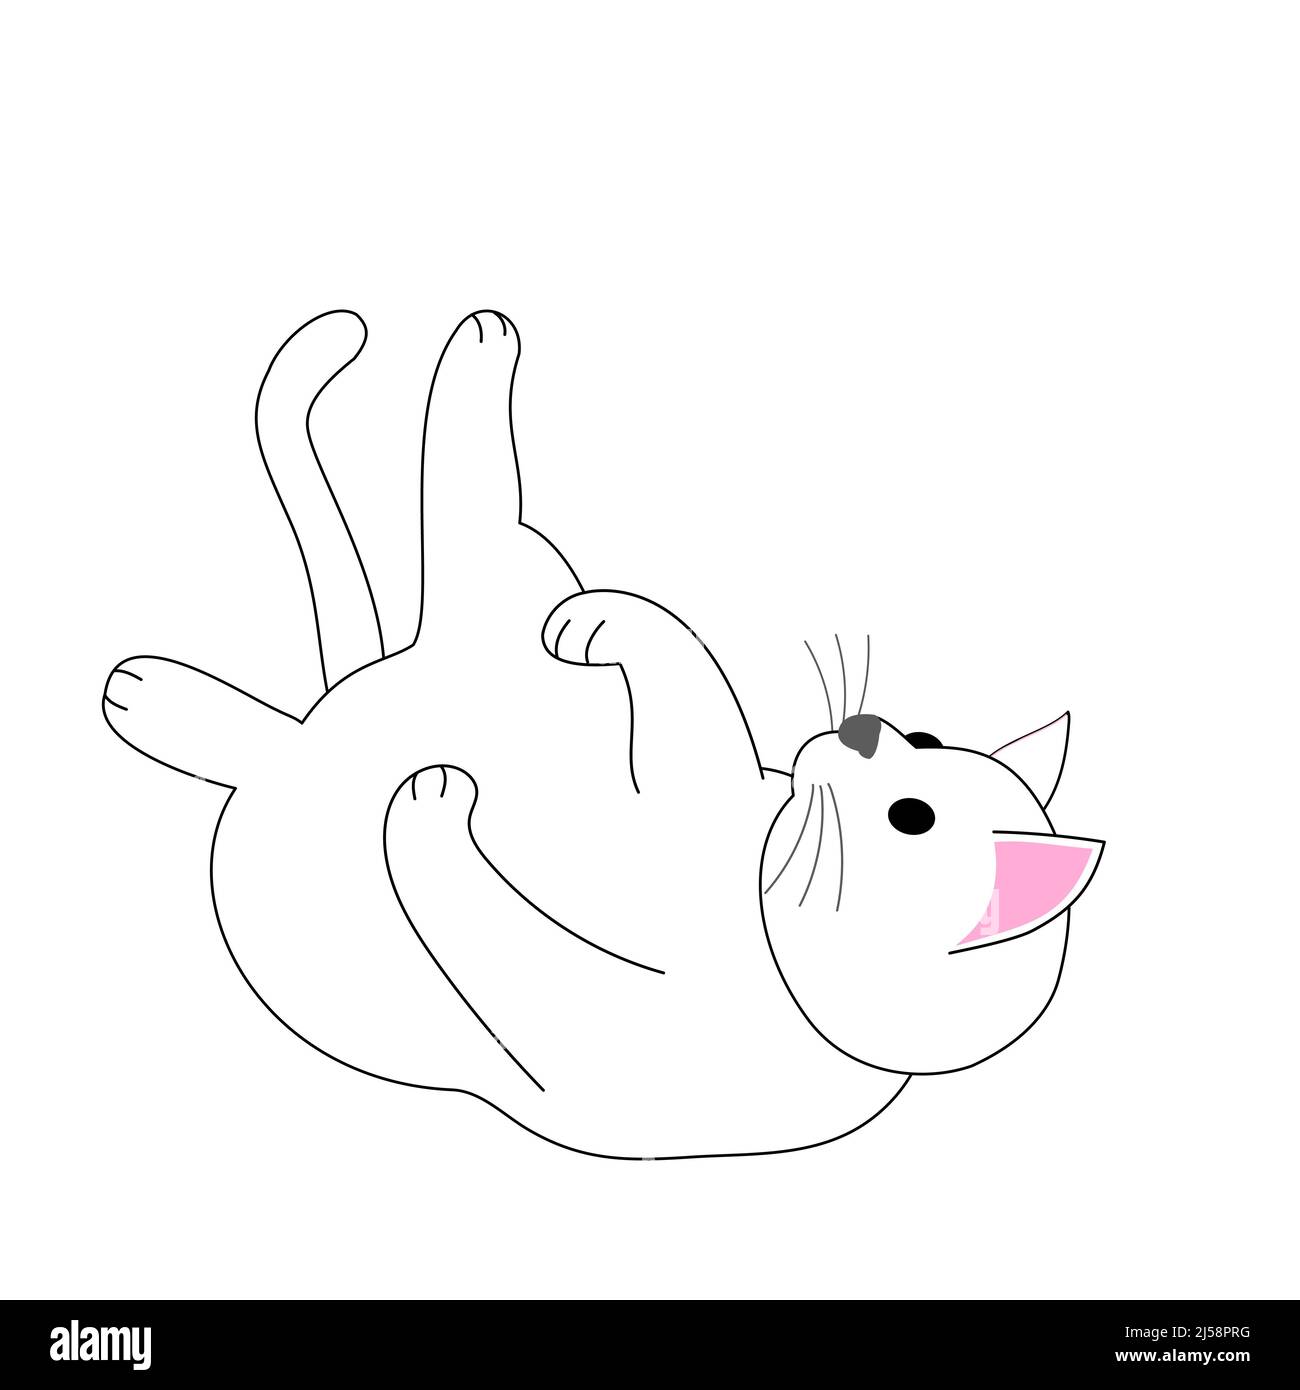 HOW TO DRAW STRAY LITTLE KITTY CAT GAME LOGO, CUTEST CAT GAME